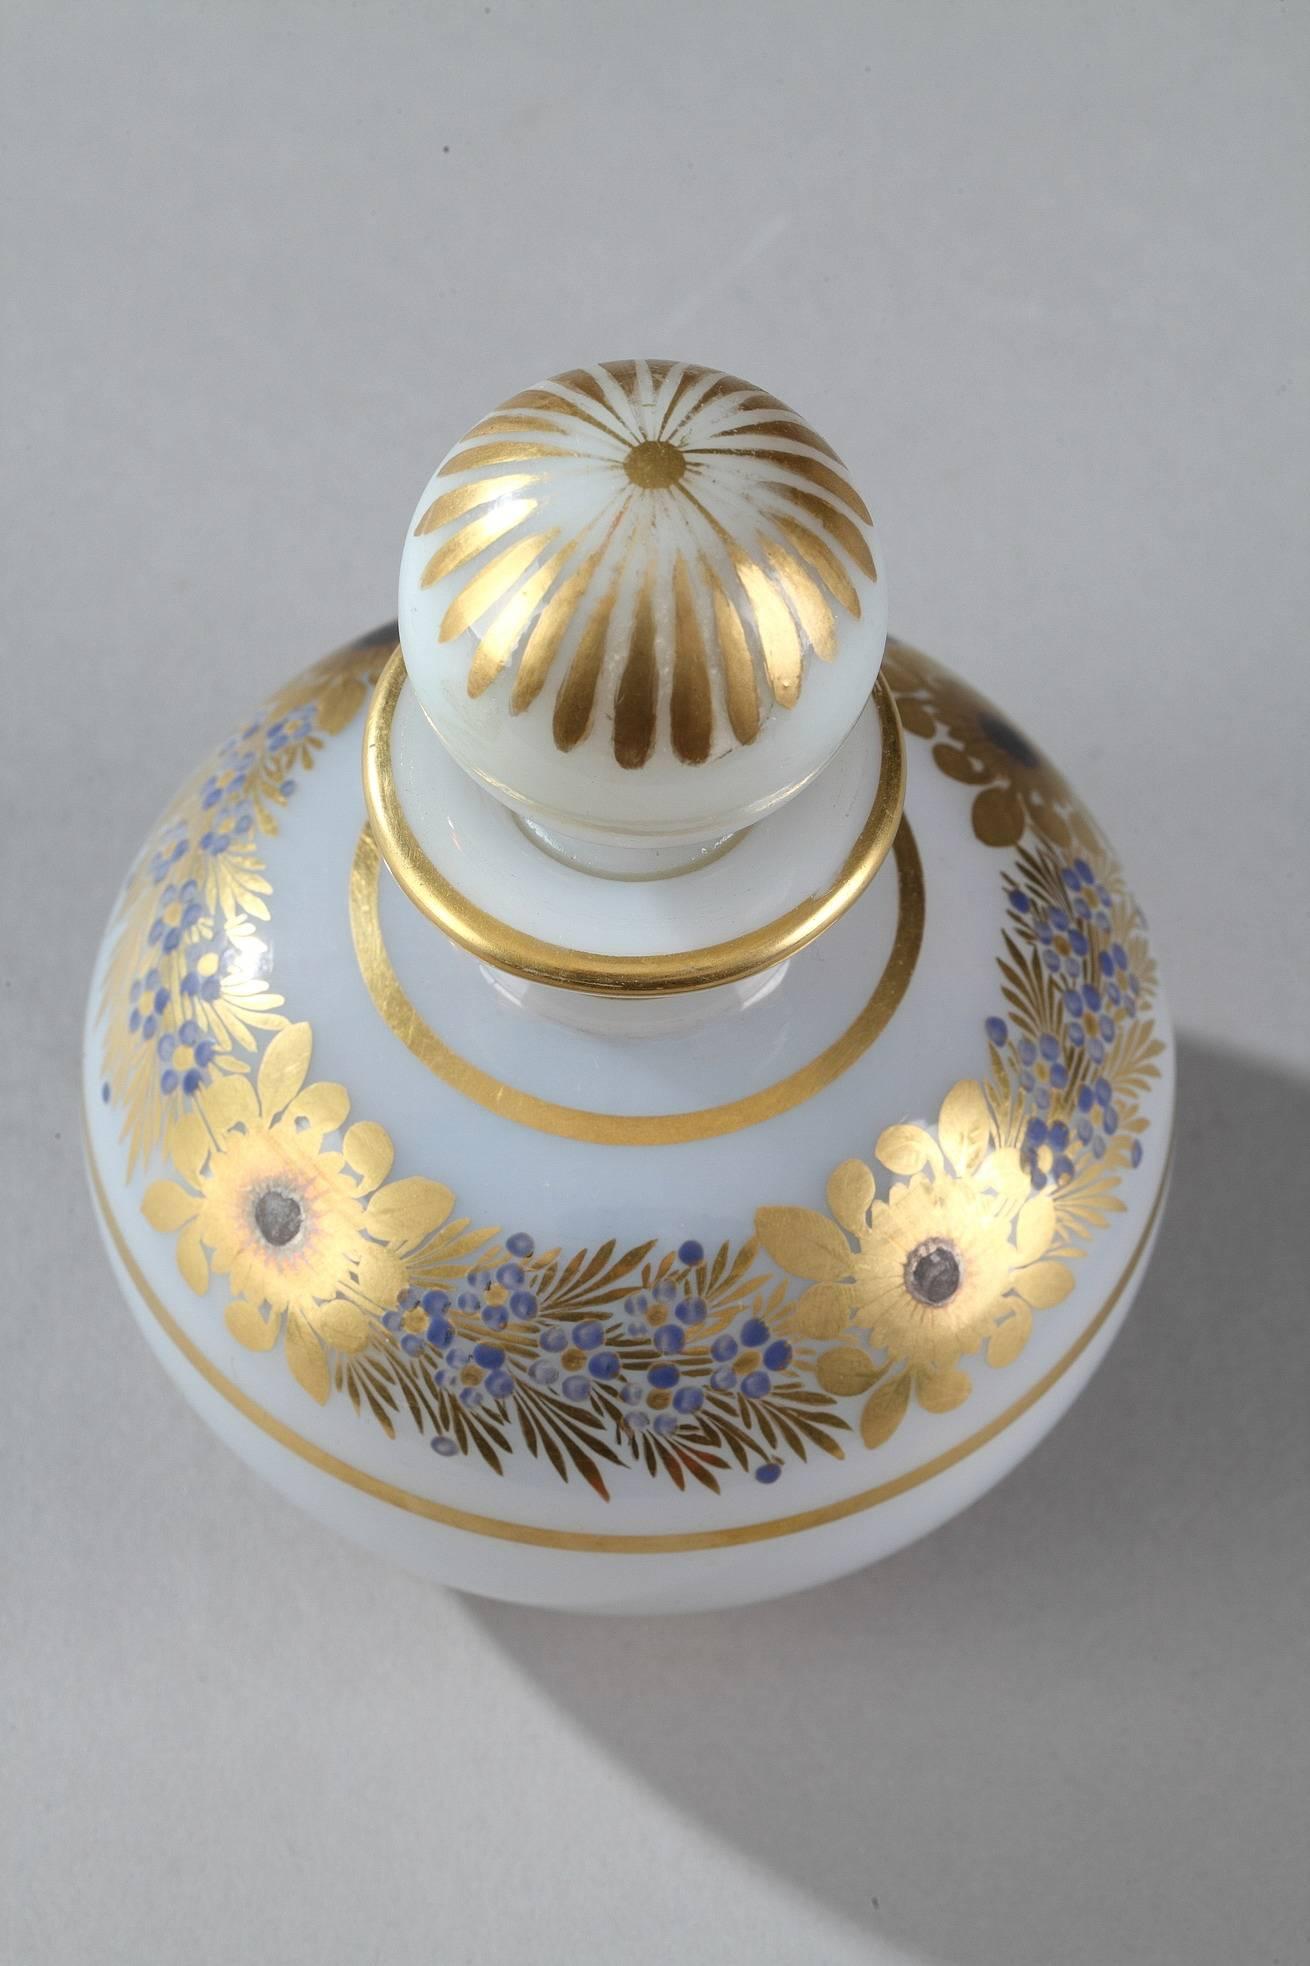 Restauration perfume bottle with its ball-shaped stopper in bulle de savon (soap bubble) opaline. A wreath of gold and blue anemones and forget-me-nots is surrounded by gilded bands, which also adorn the neck. The stopper is topped with petals. This